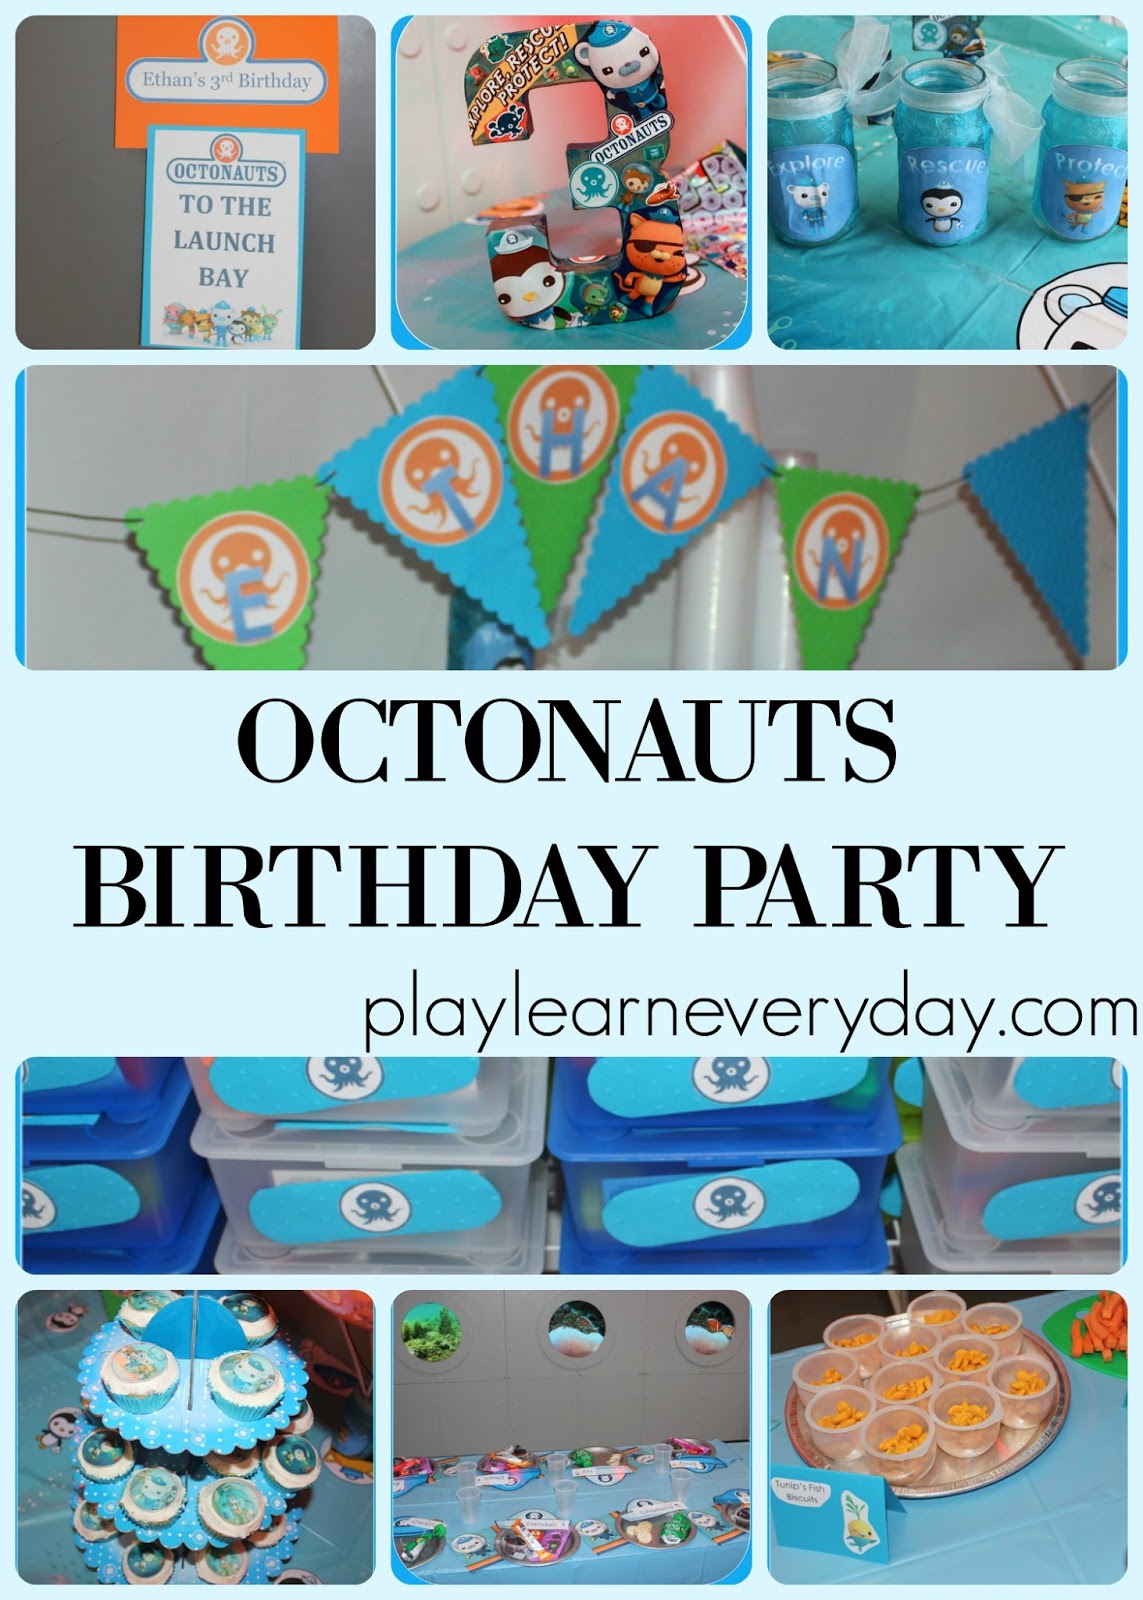 Ethan's Octonauts Third Birthday Party - Play and Learn Every Day